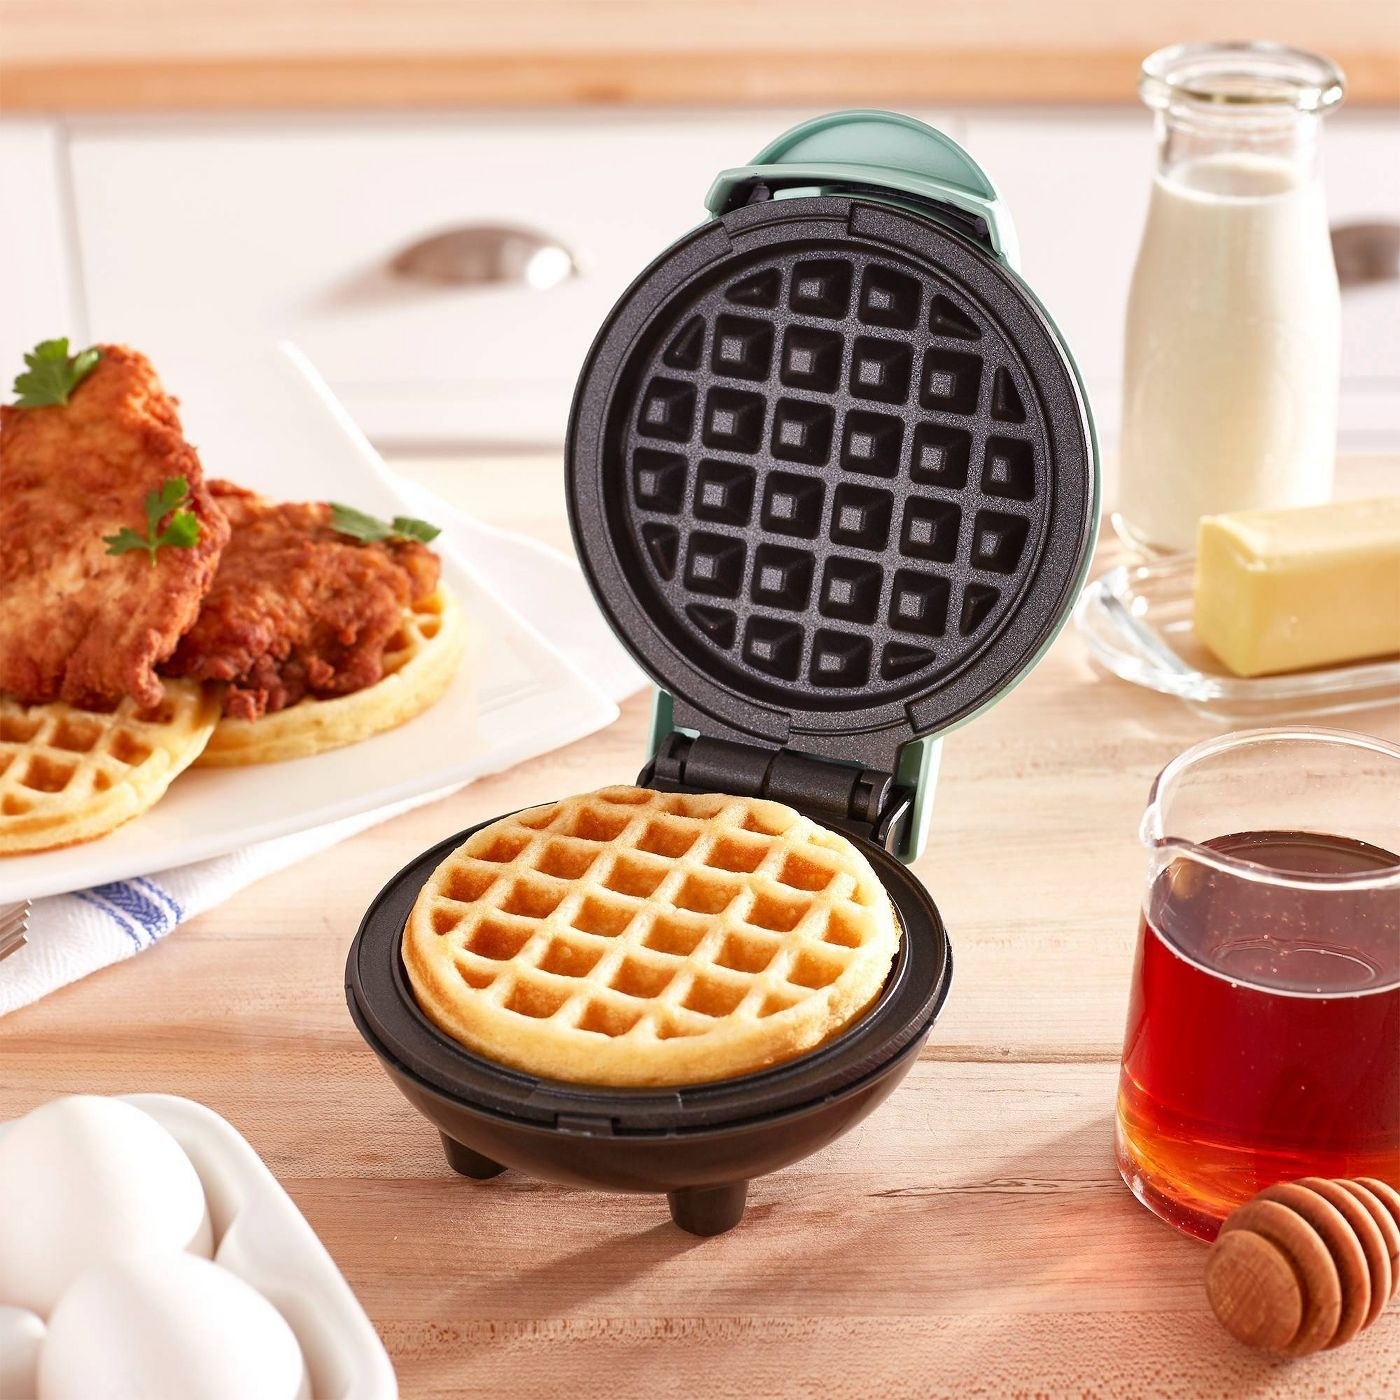 A mini waffle maker with a waffle in it on a breakfast table